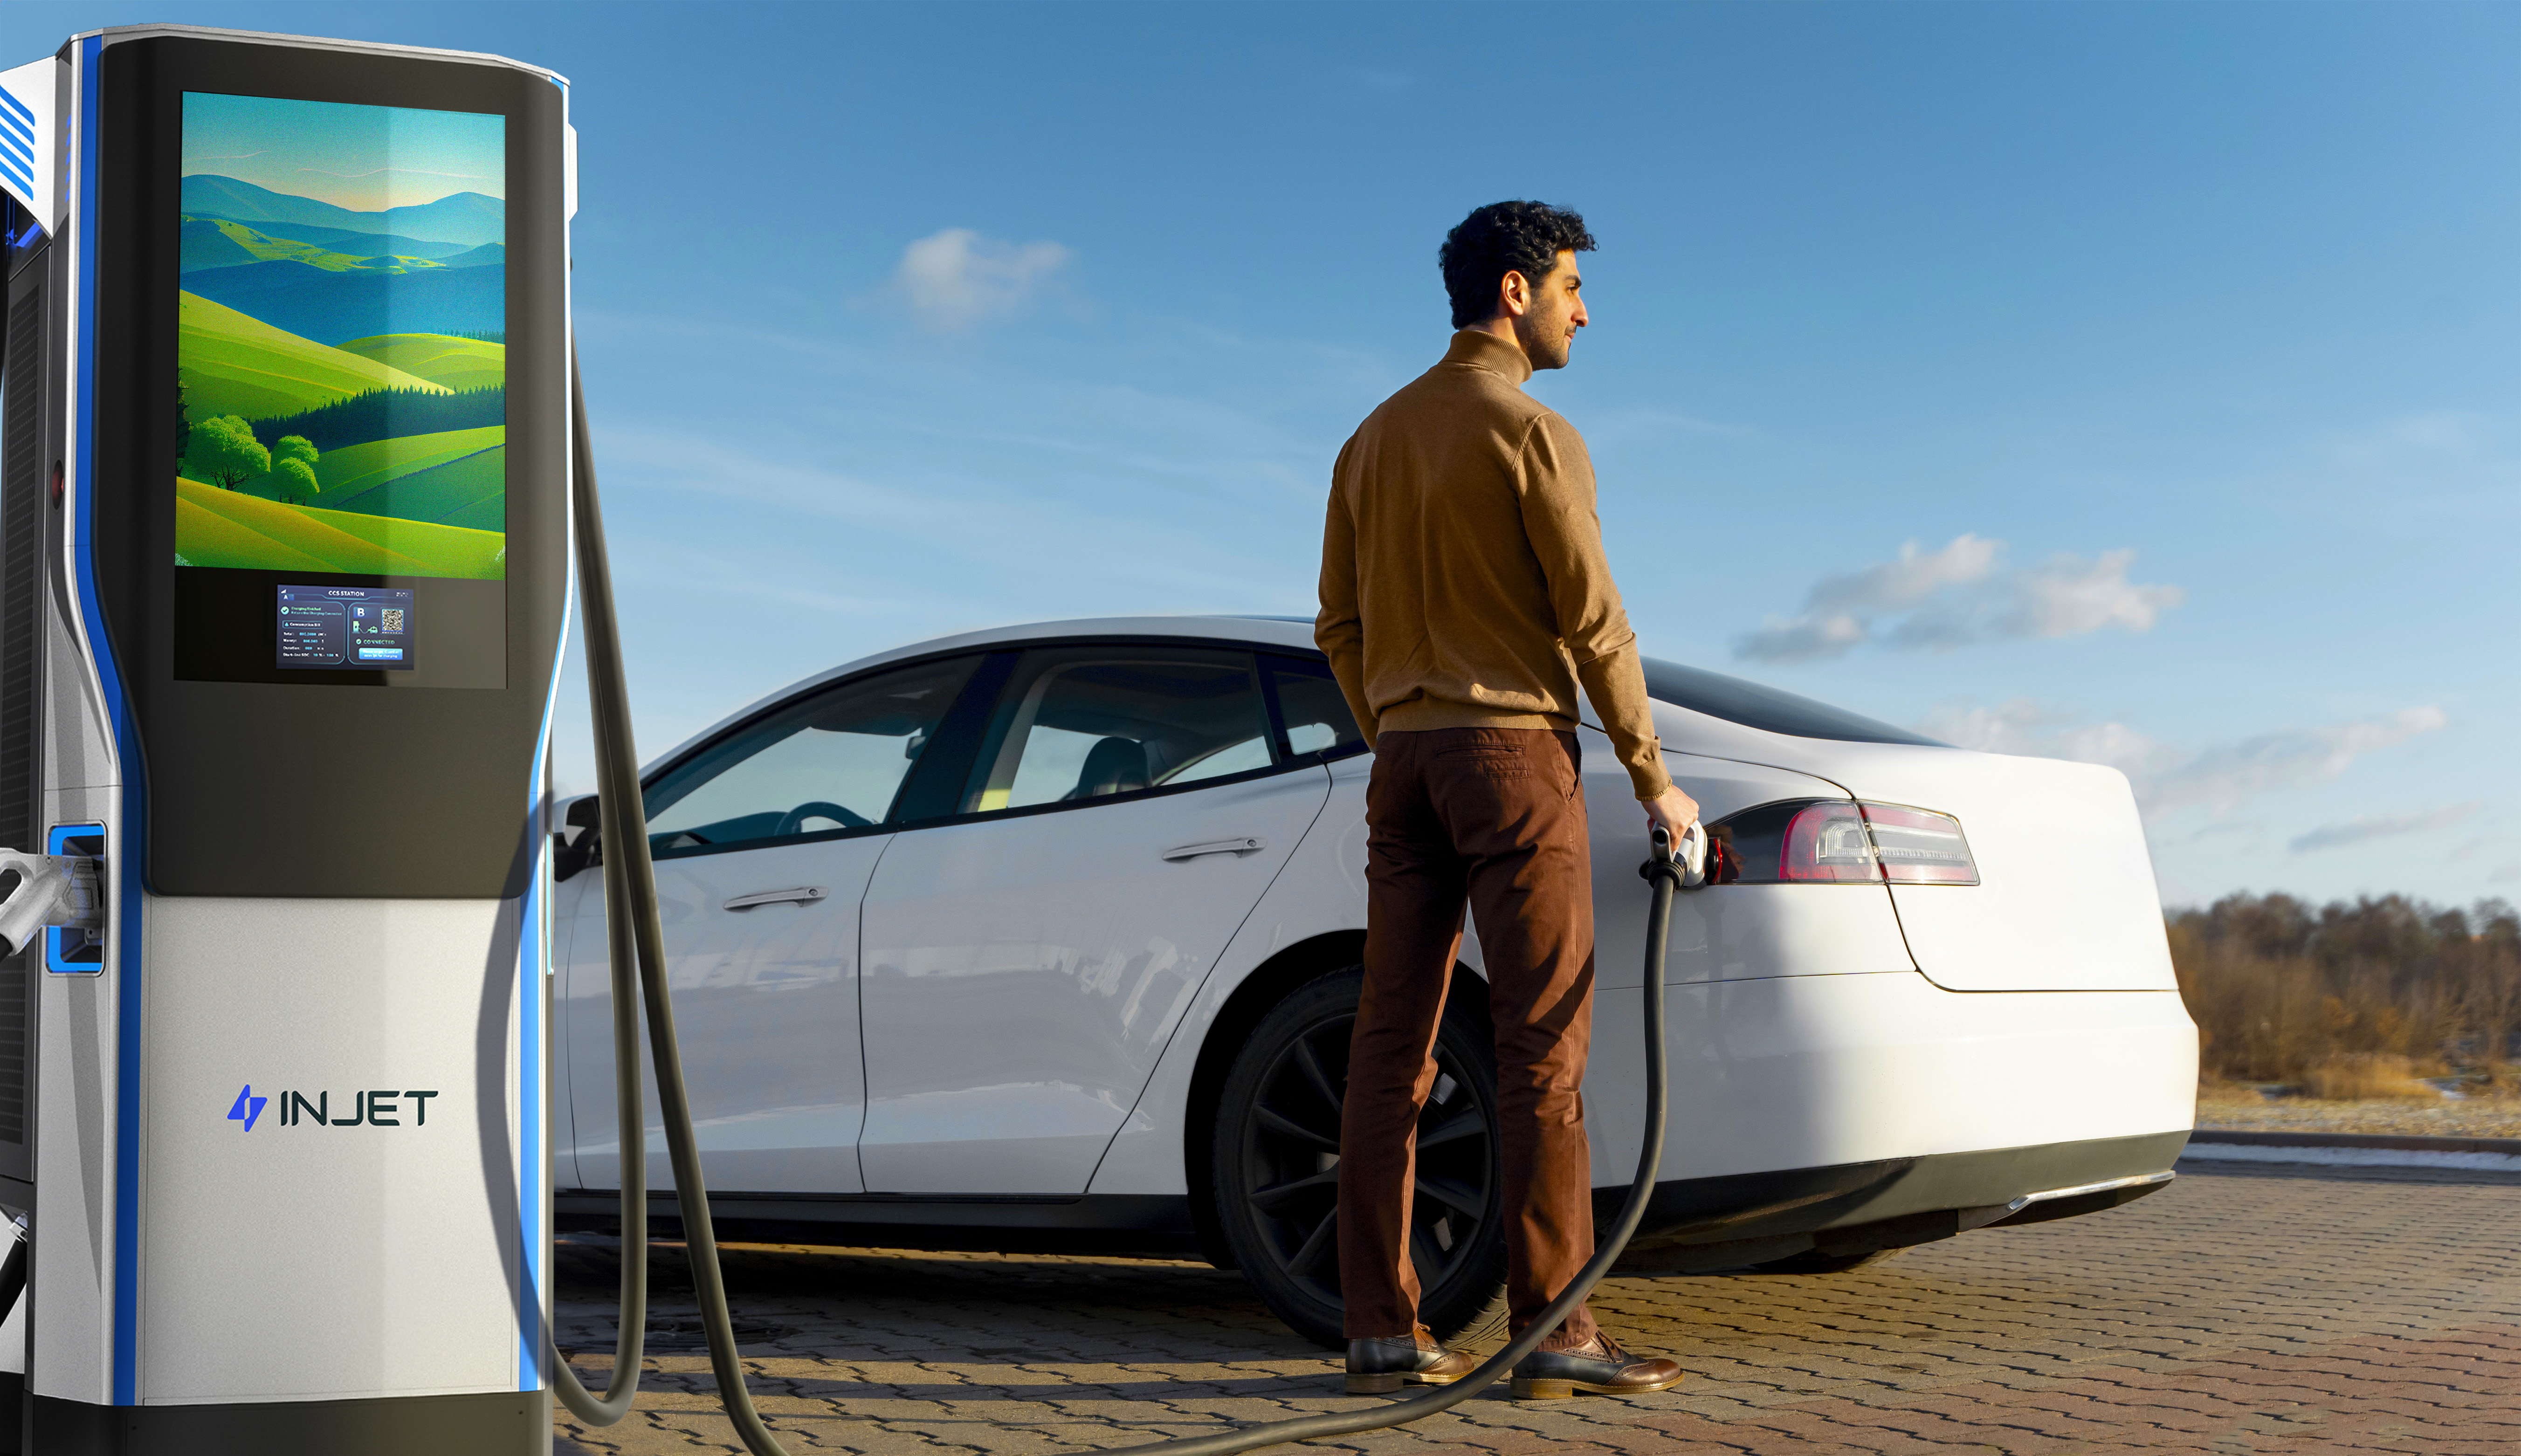 Ampax DC EV Charger by Injet New Energy: Supercharging the Future of Electric Vehicles